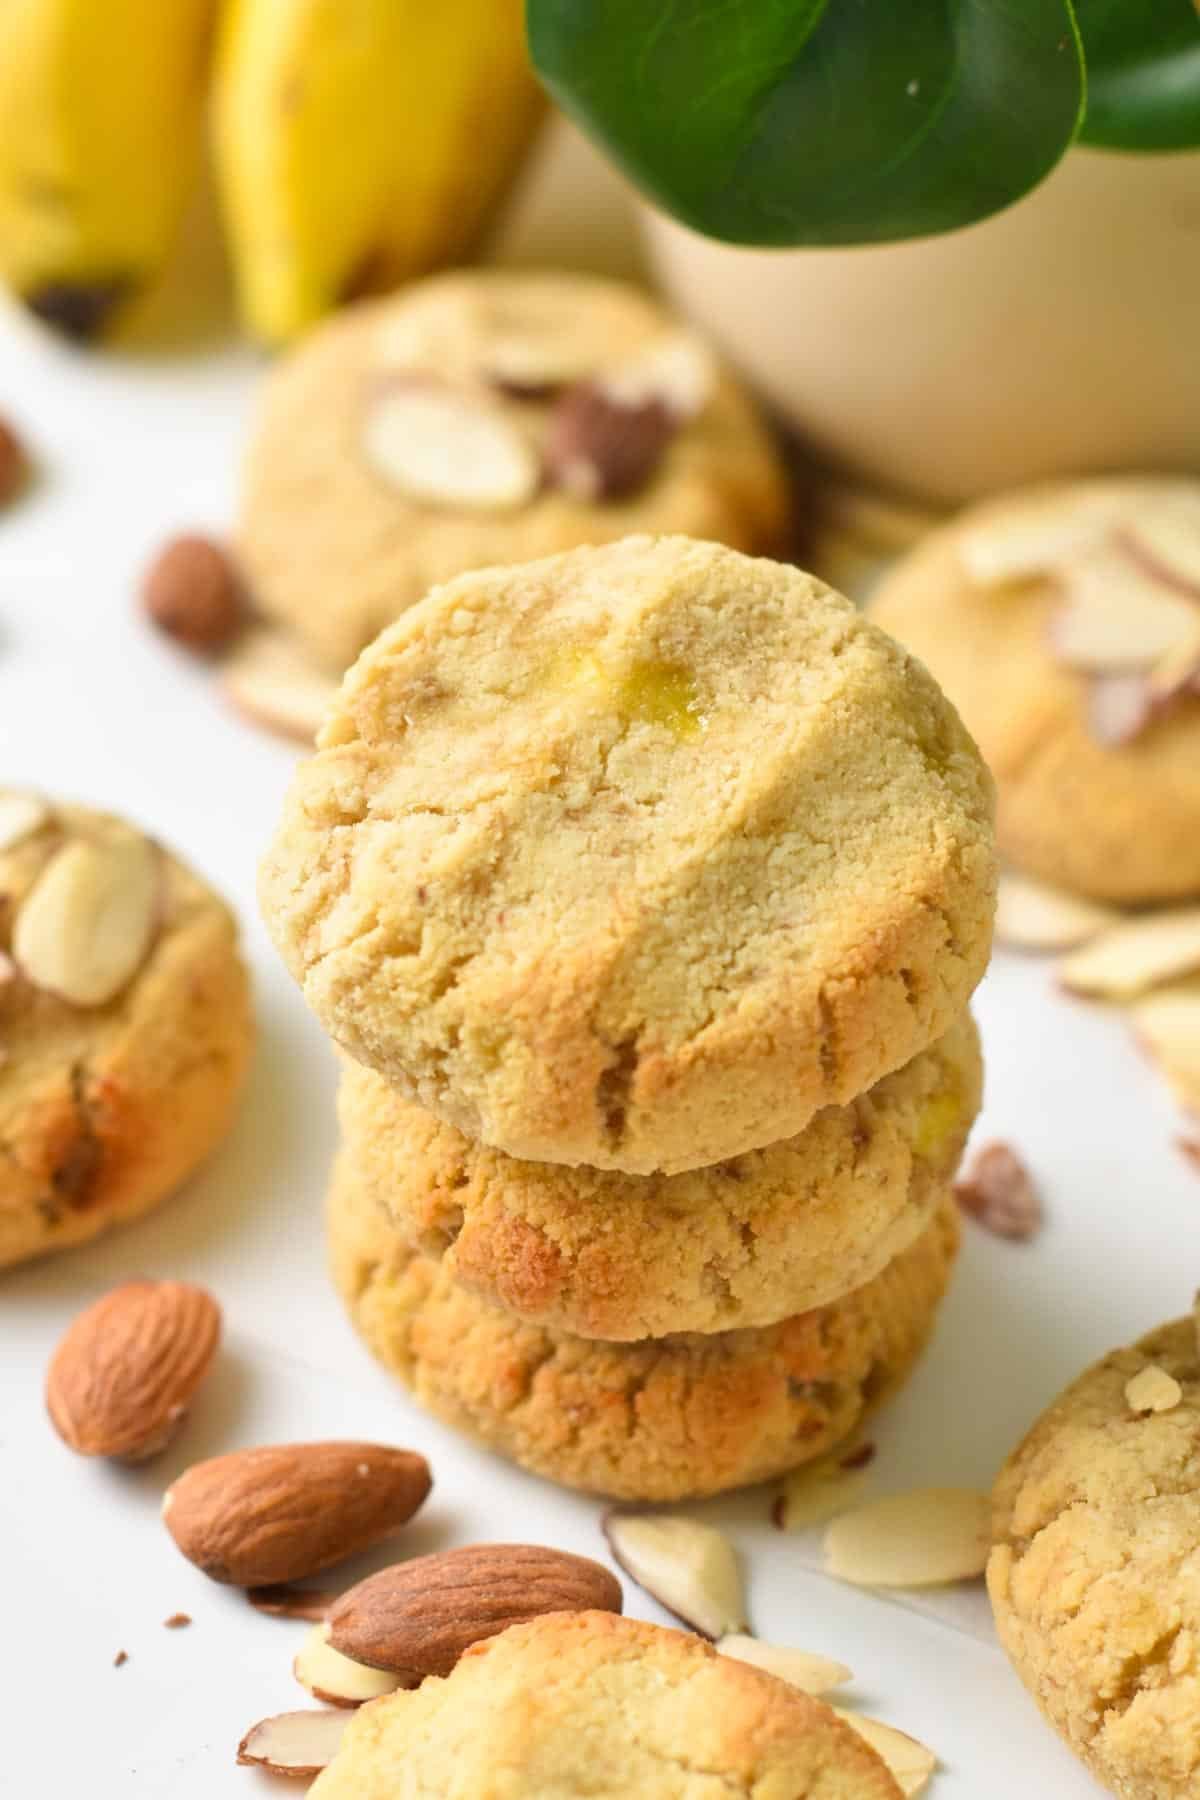 A stack of three Almond Flour Banana Cookies with whole almonds.